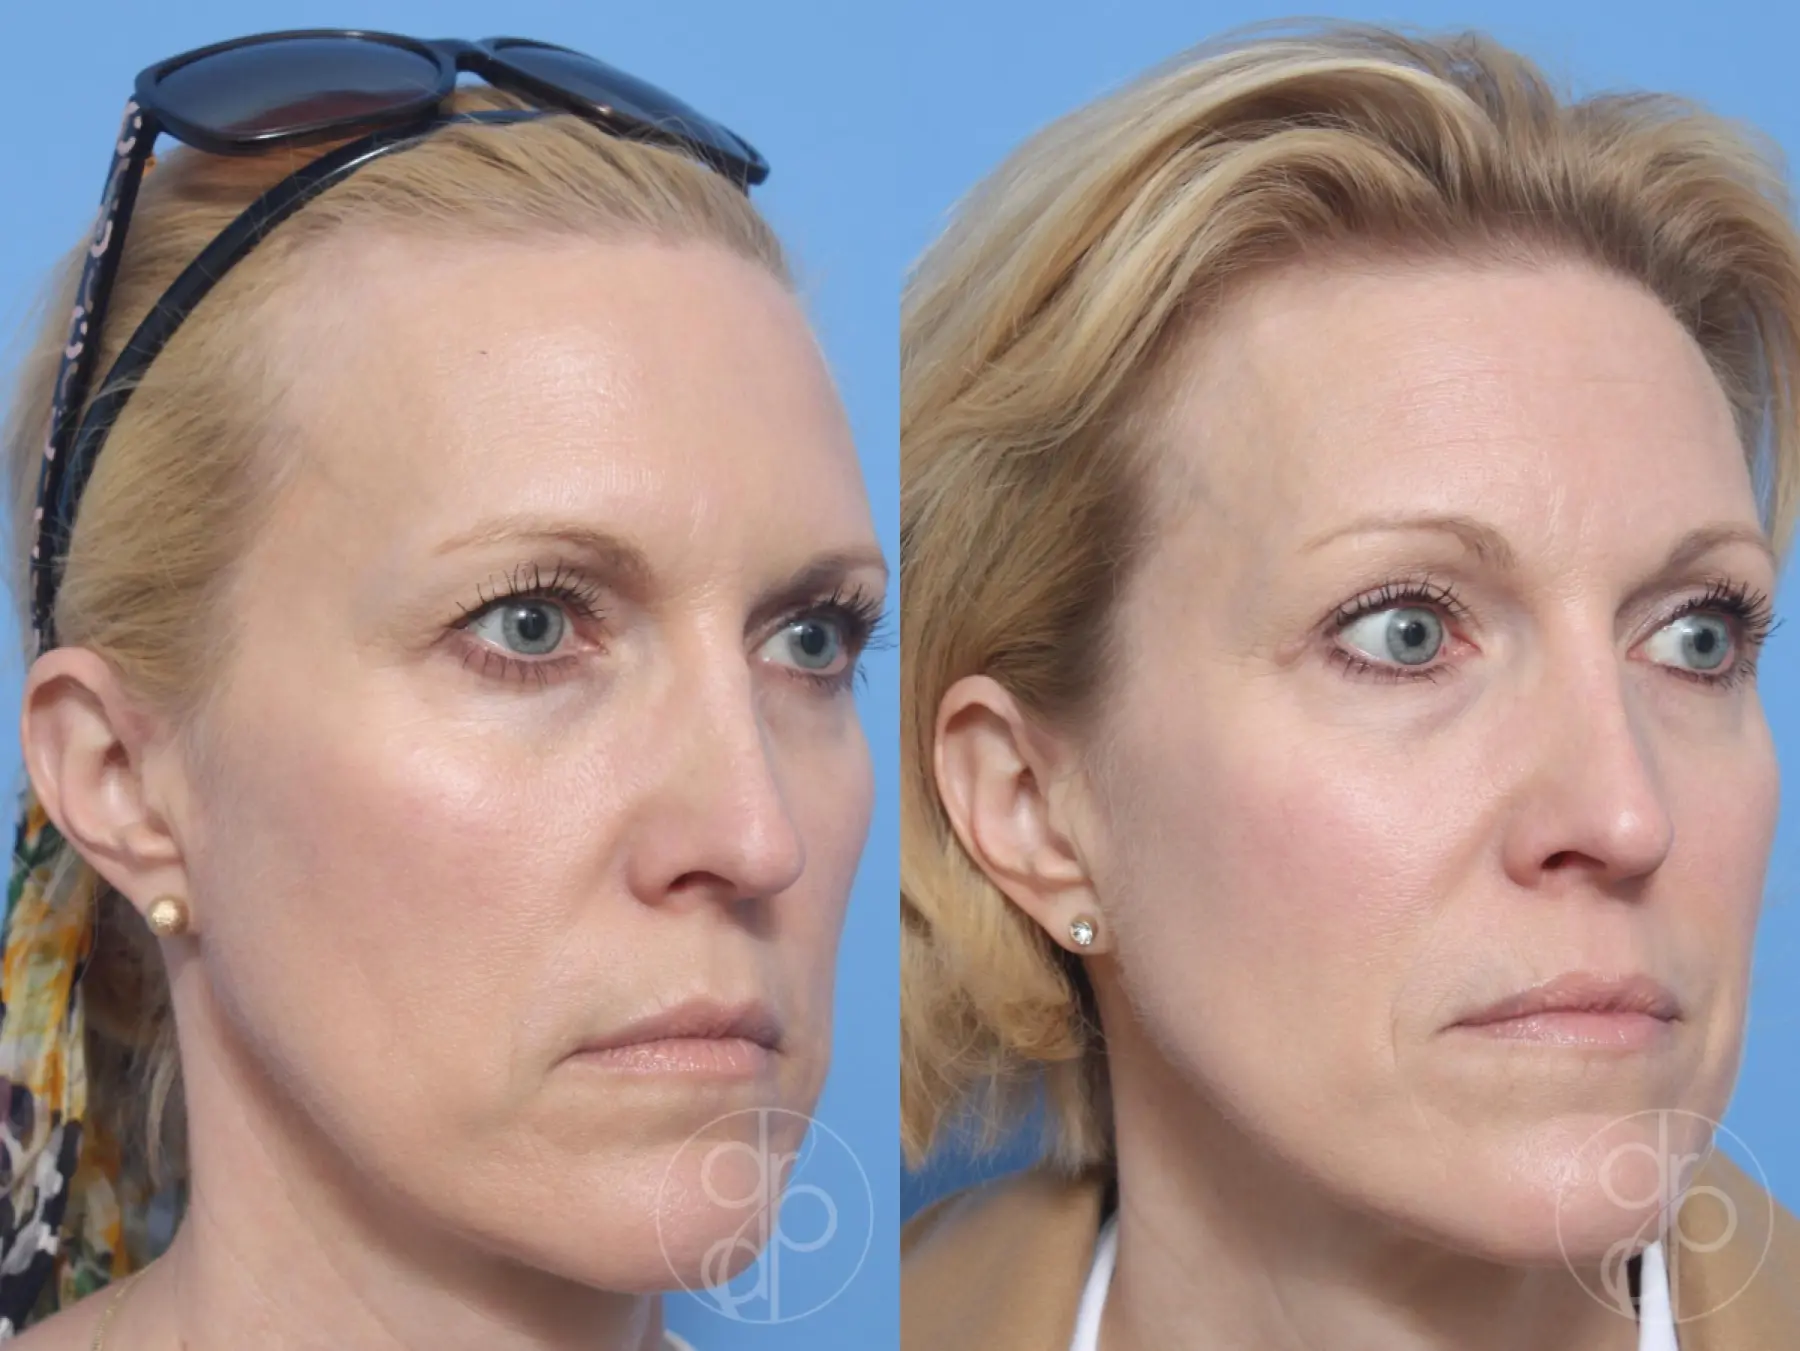 patient 13240 blepharoplasty before and after result - Before and After 2